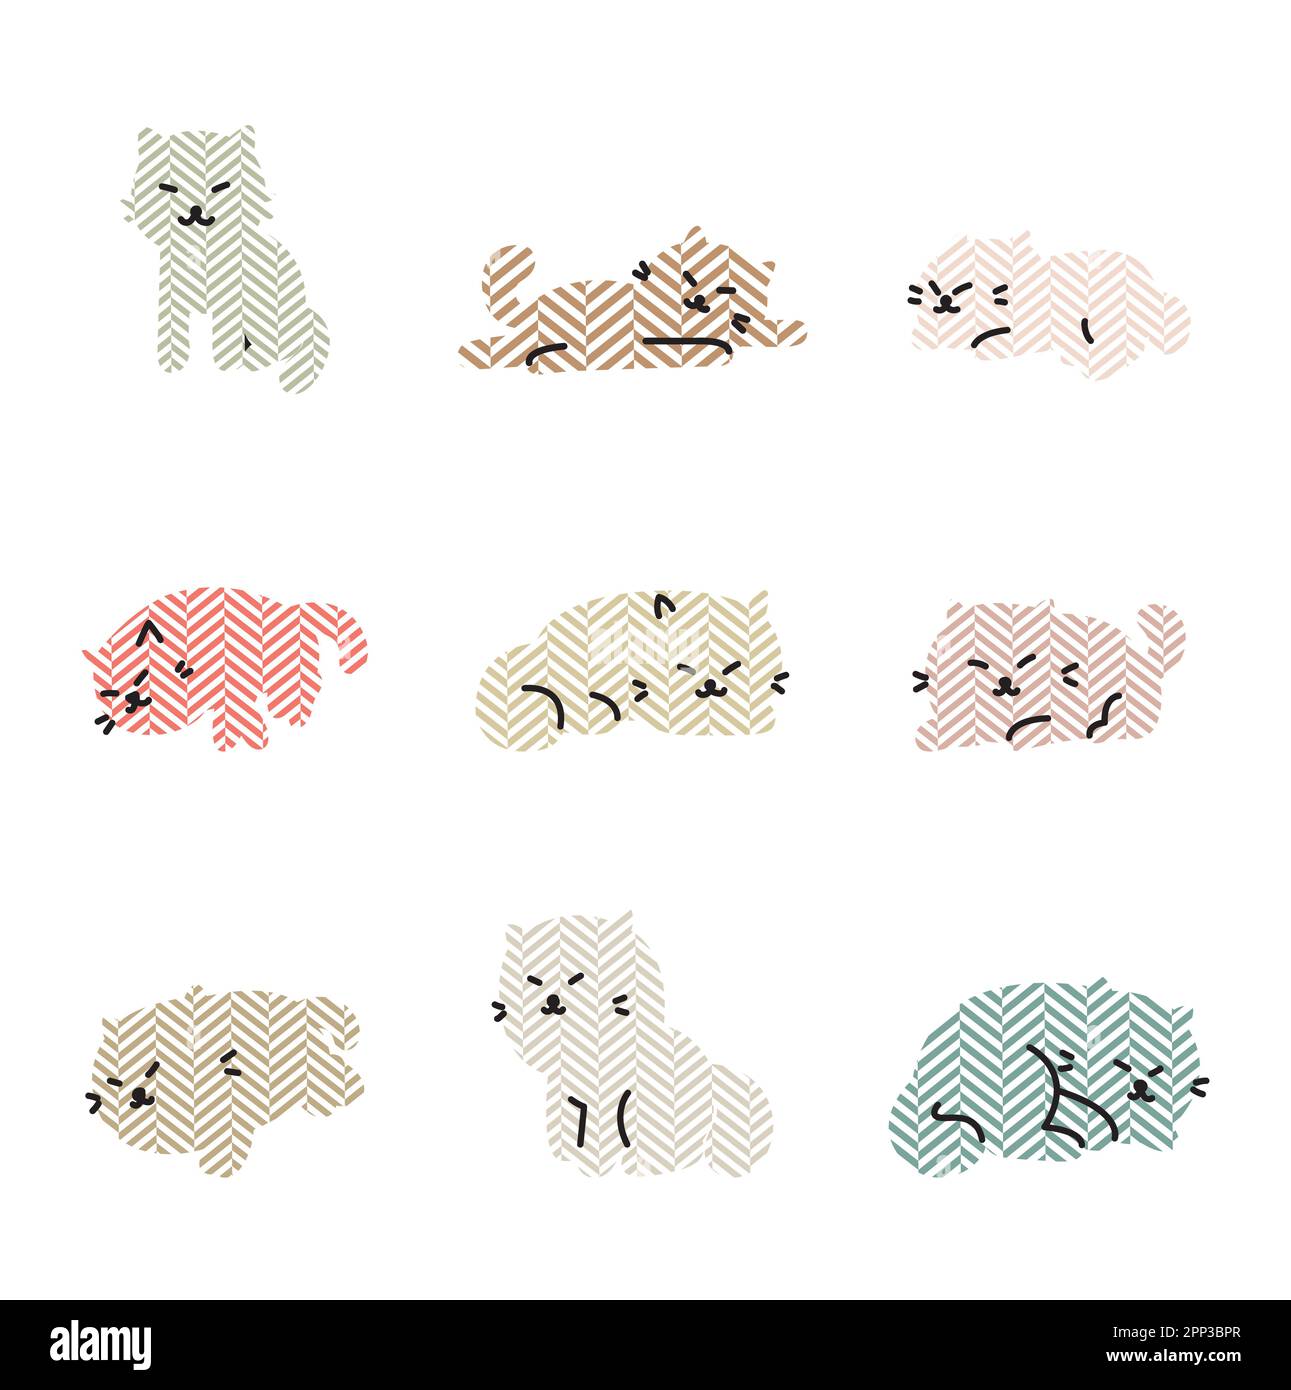 Cat Clipart-icon style cat simple drawing